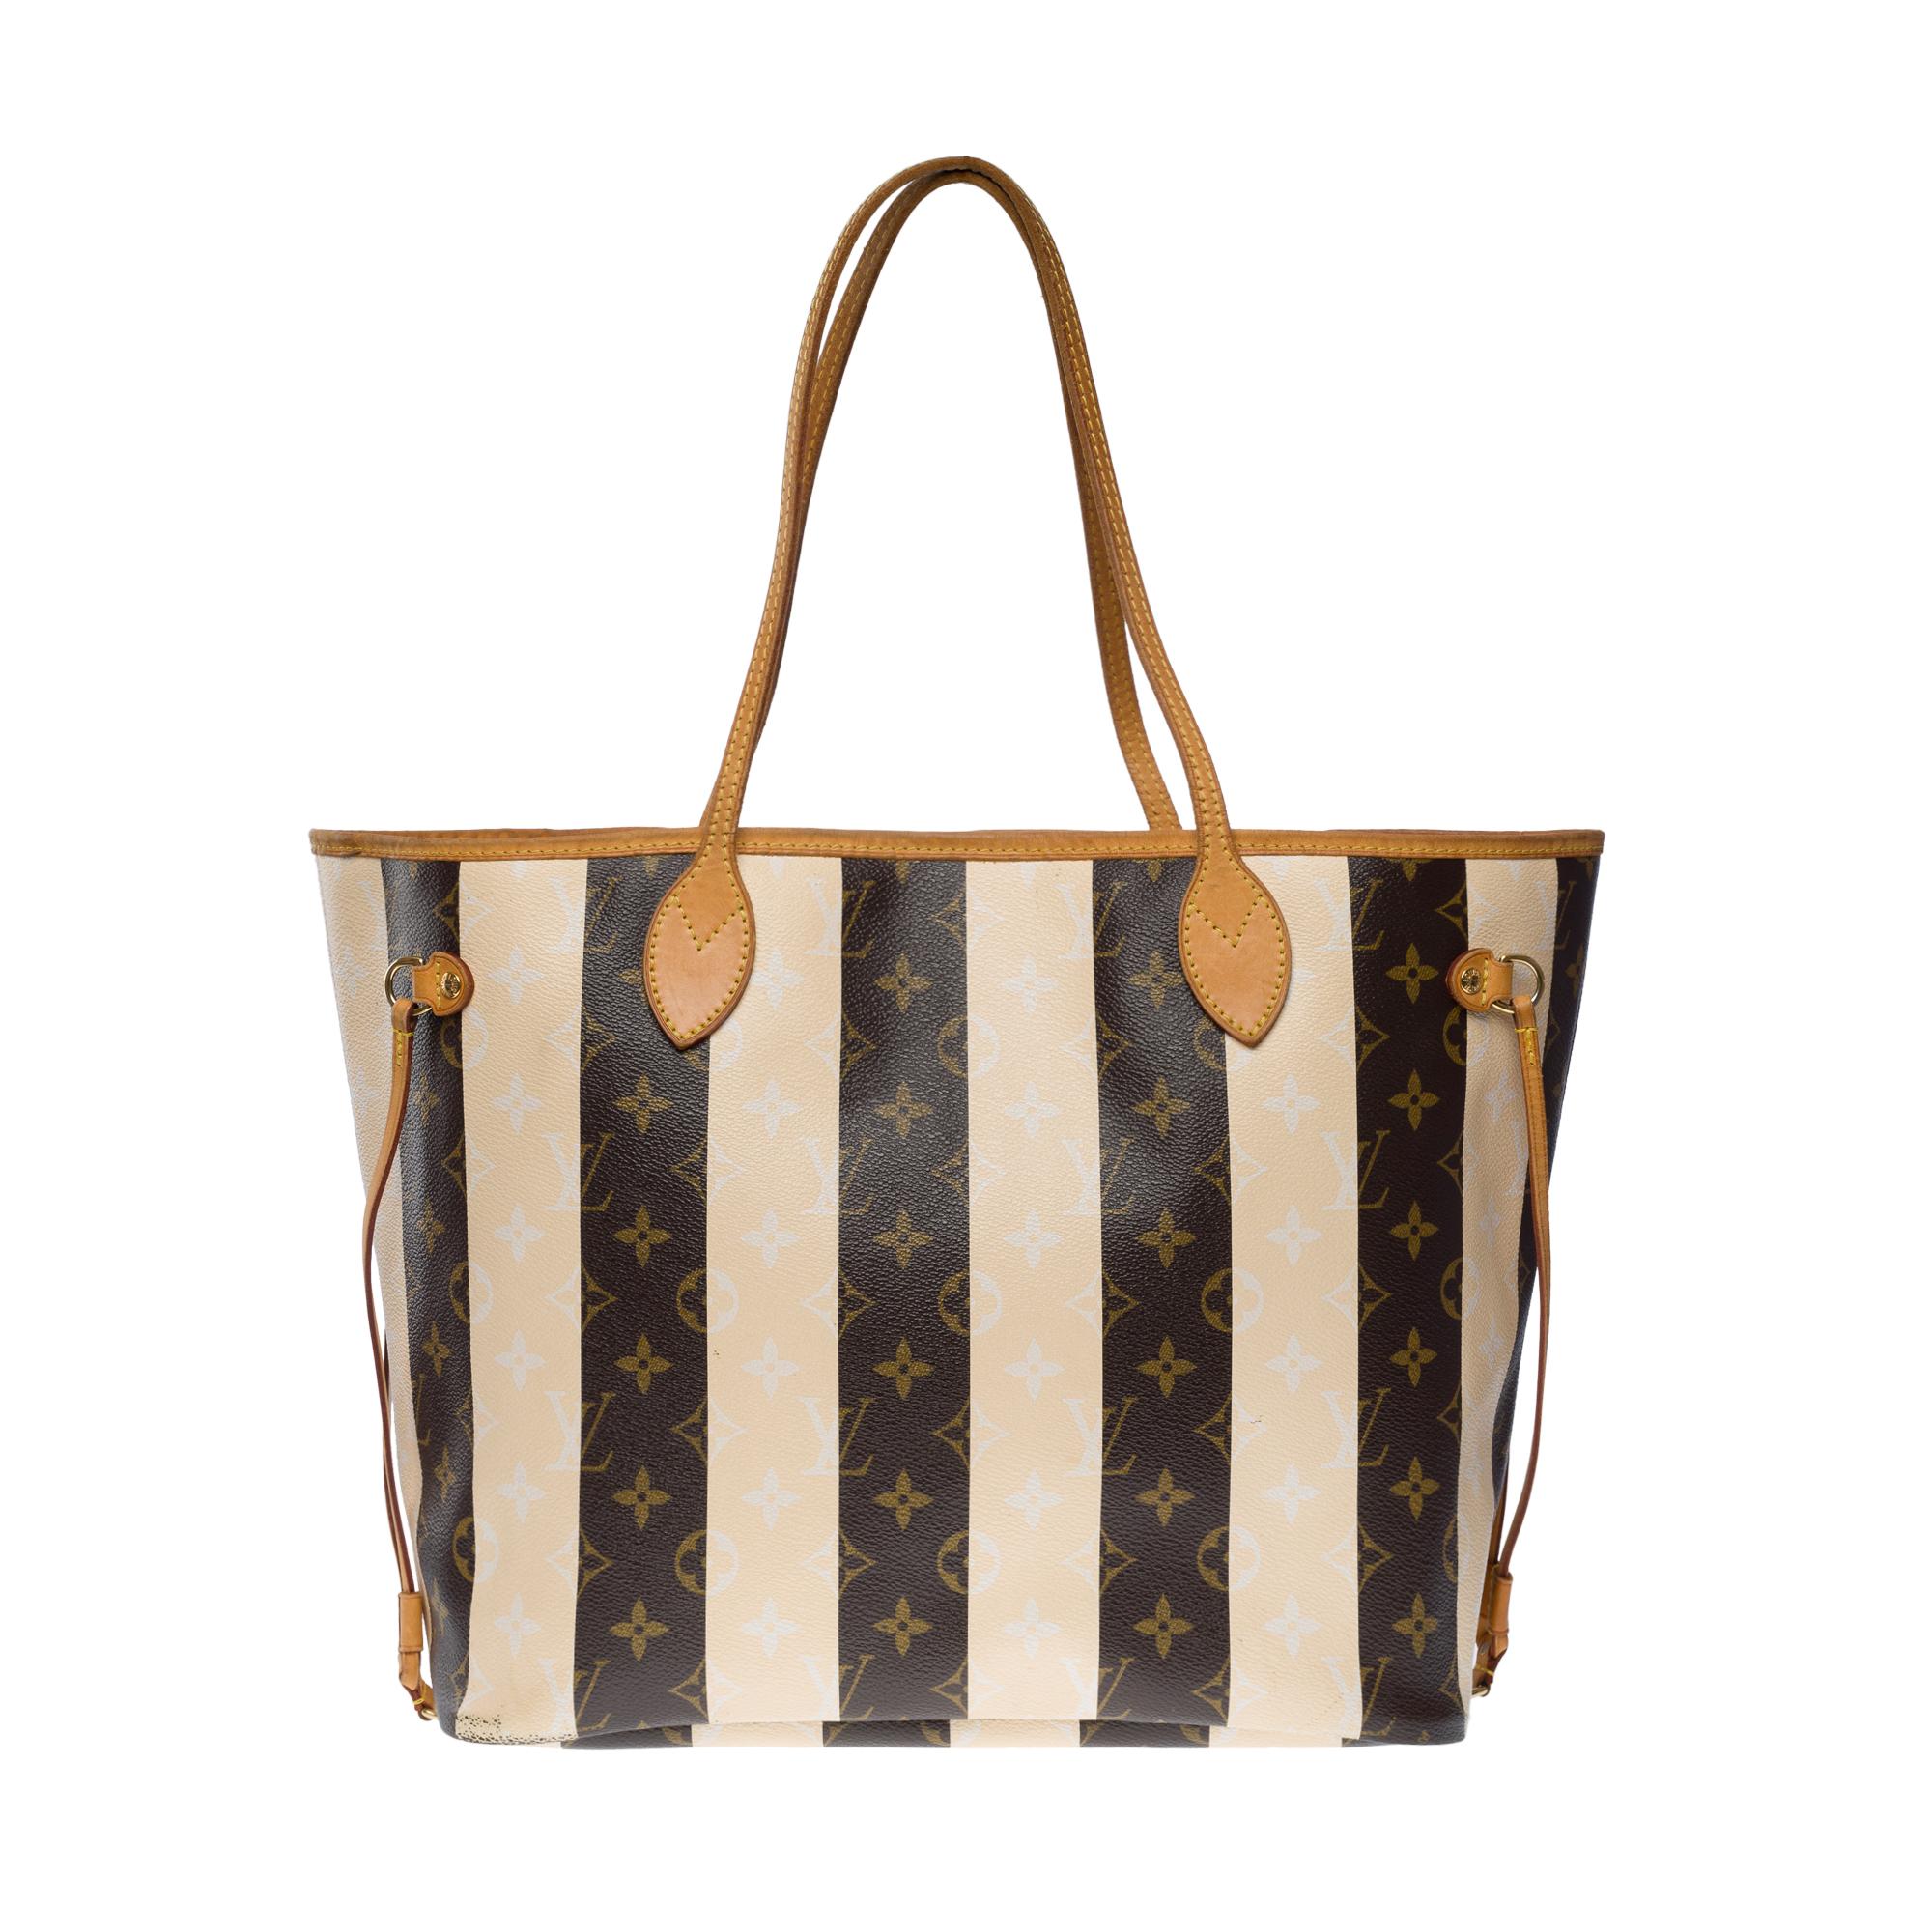 The Collector Louis Vuitton Neverfull limited edition Stripes Tote bag in brown monogram canvas and natural leather, gold metal hardware, double handle in natural leather allowing a hand or shoulder support

A snap fastener
Inner lining in striped